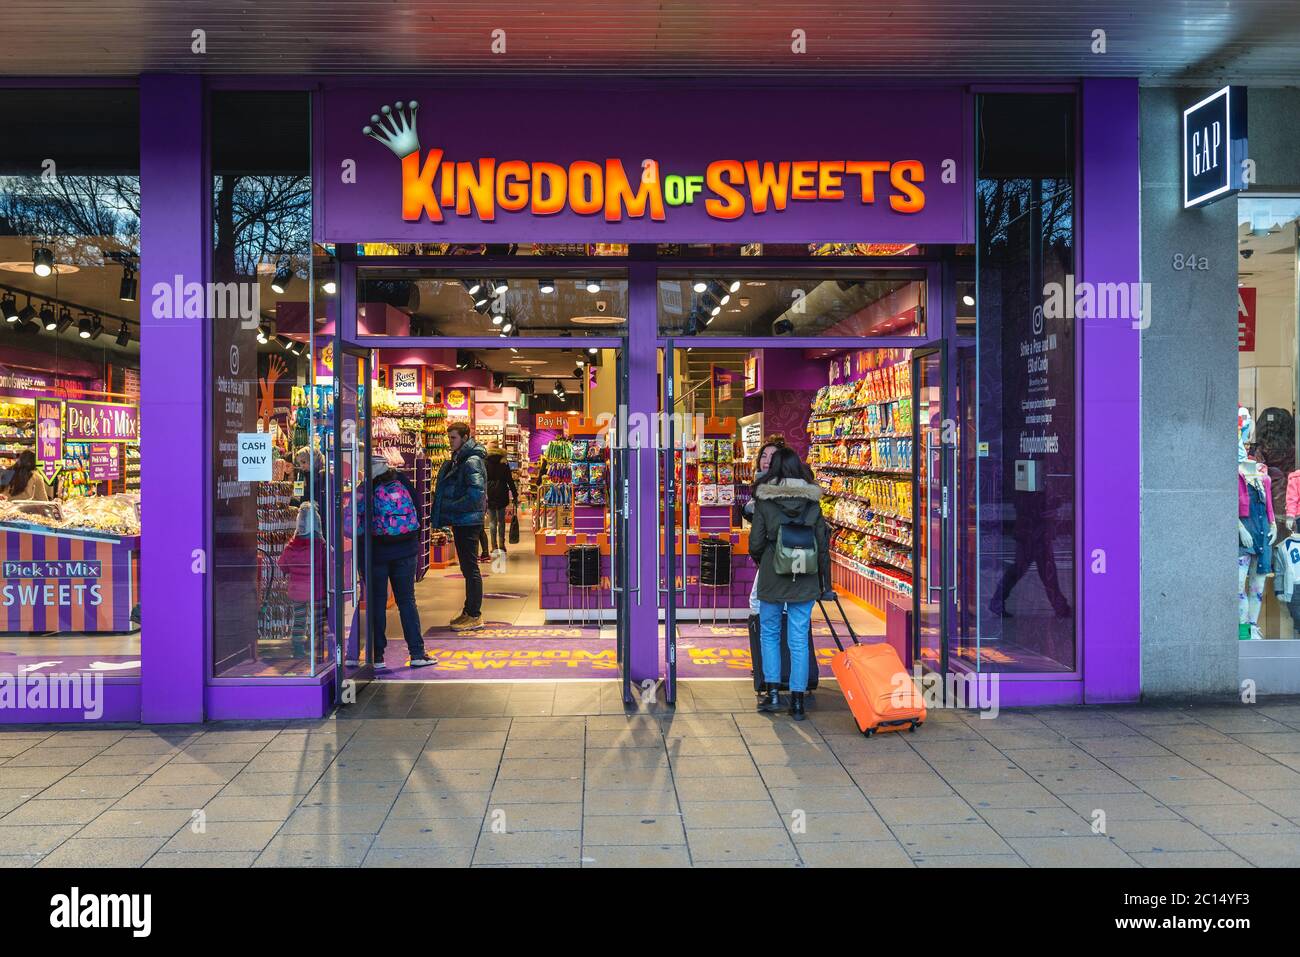 Kingdom of Sweets sweet shop located on Princess Street in New Town district of Edinburgh, the capital of Scotland, part of United Kingdom Stock Photo